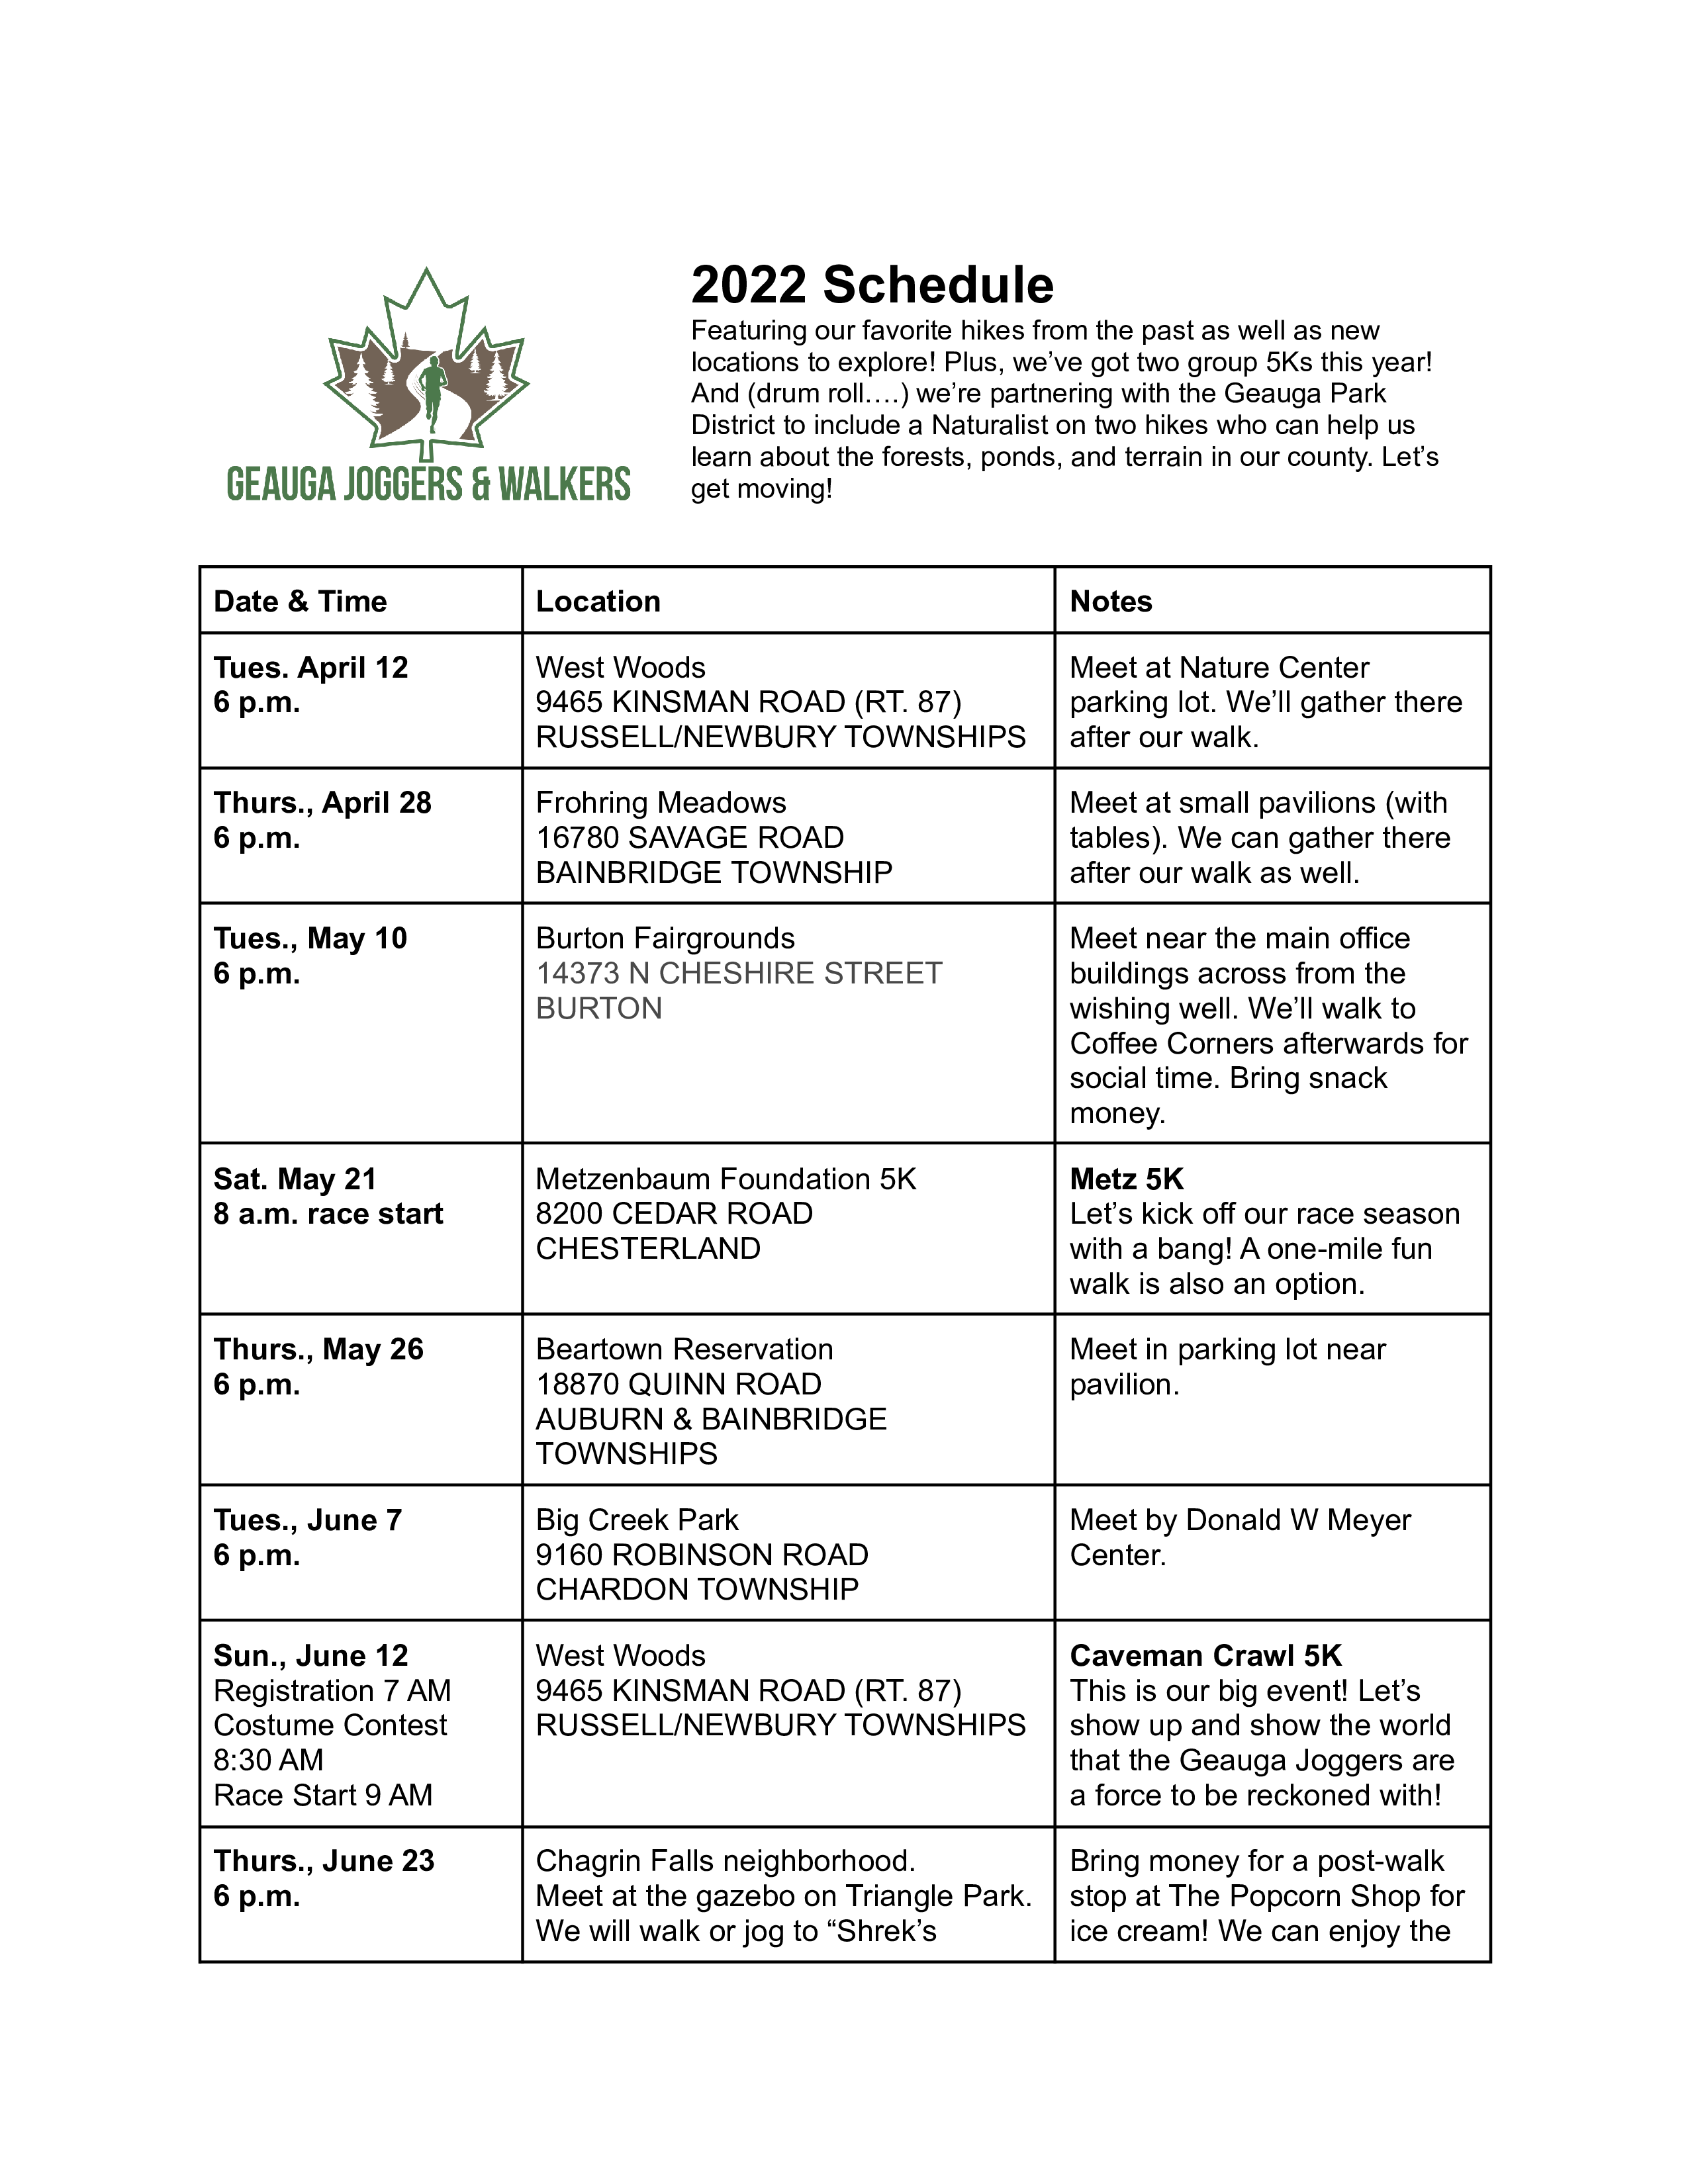 2022 Geauga Joggers and Walkers Schedule-P1